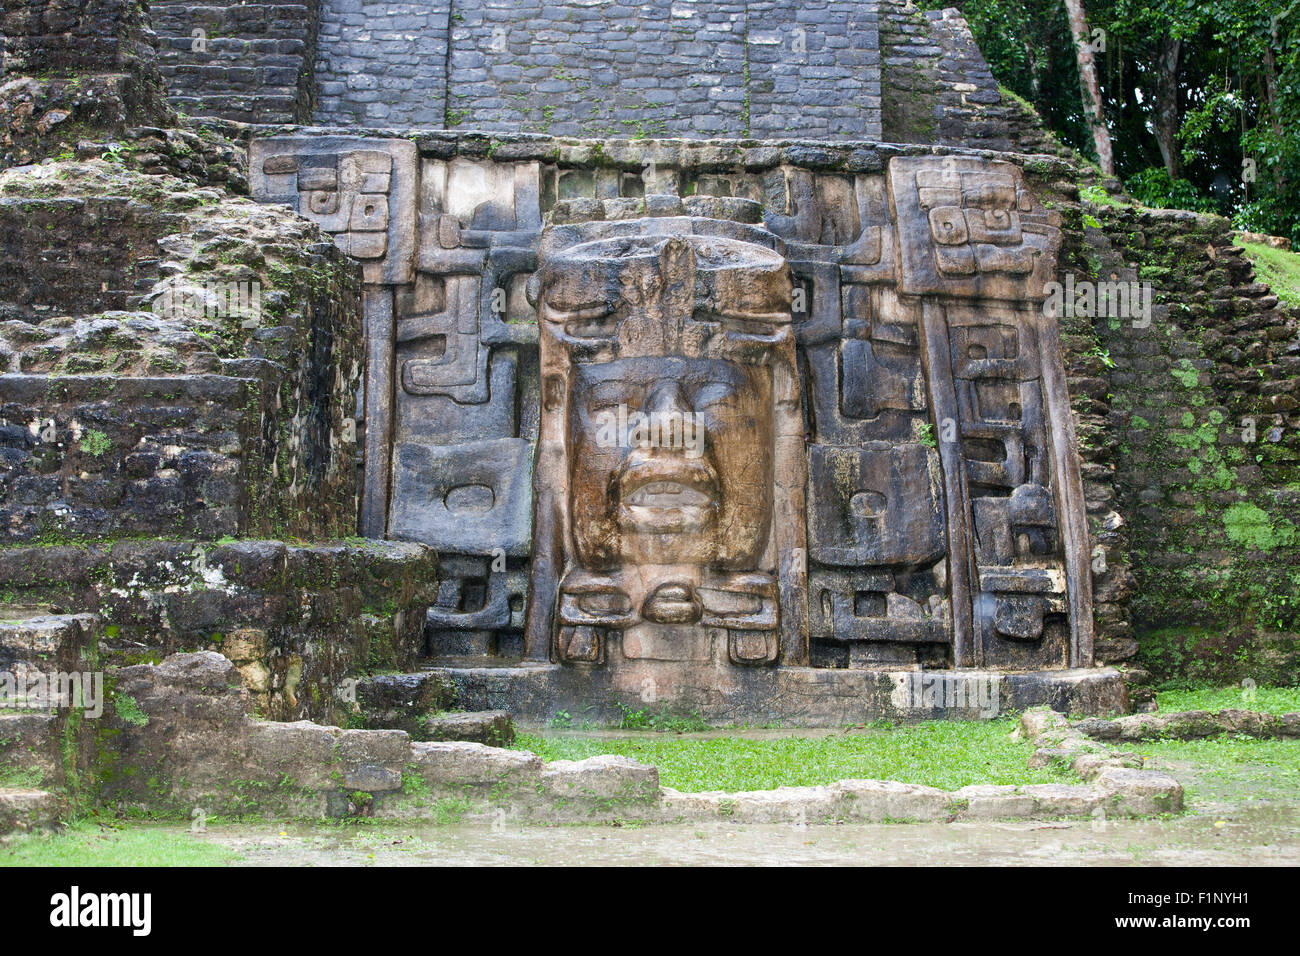 An Olmec style face adorns the side of the Mask Temple wall at the Mayan site of Lamanai in Belize. Stock Photo